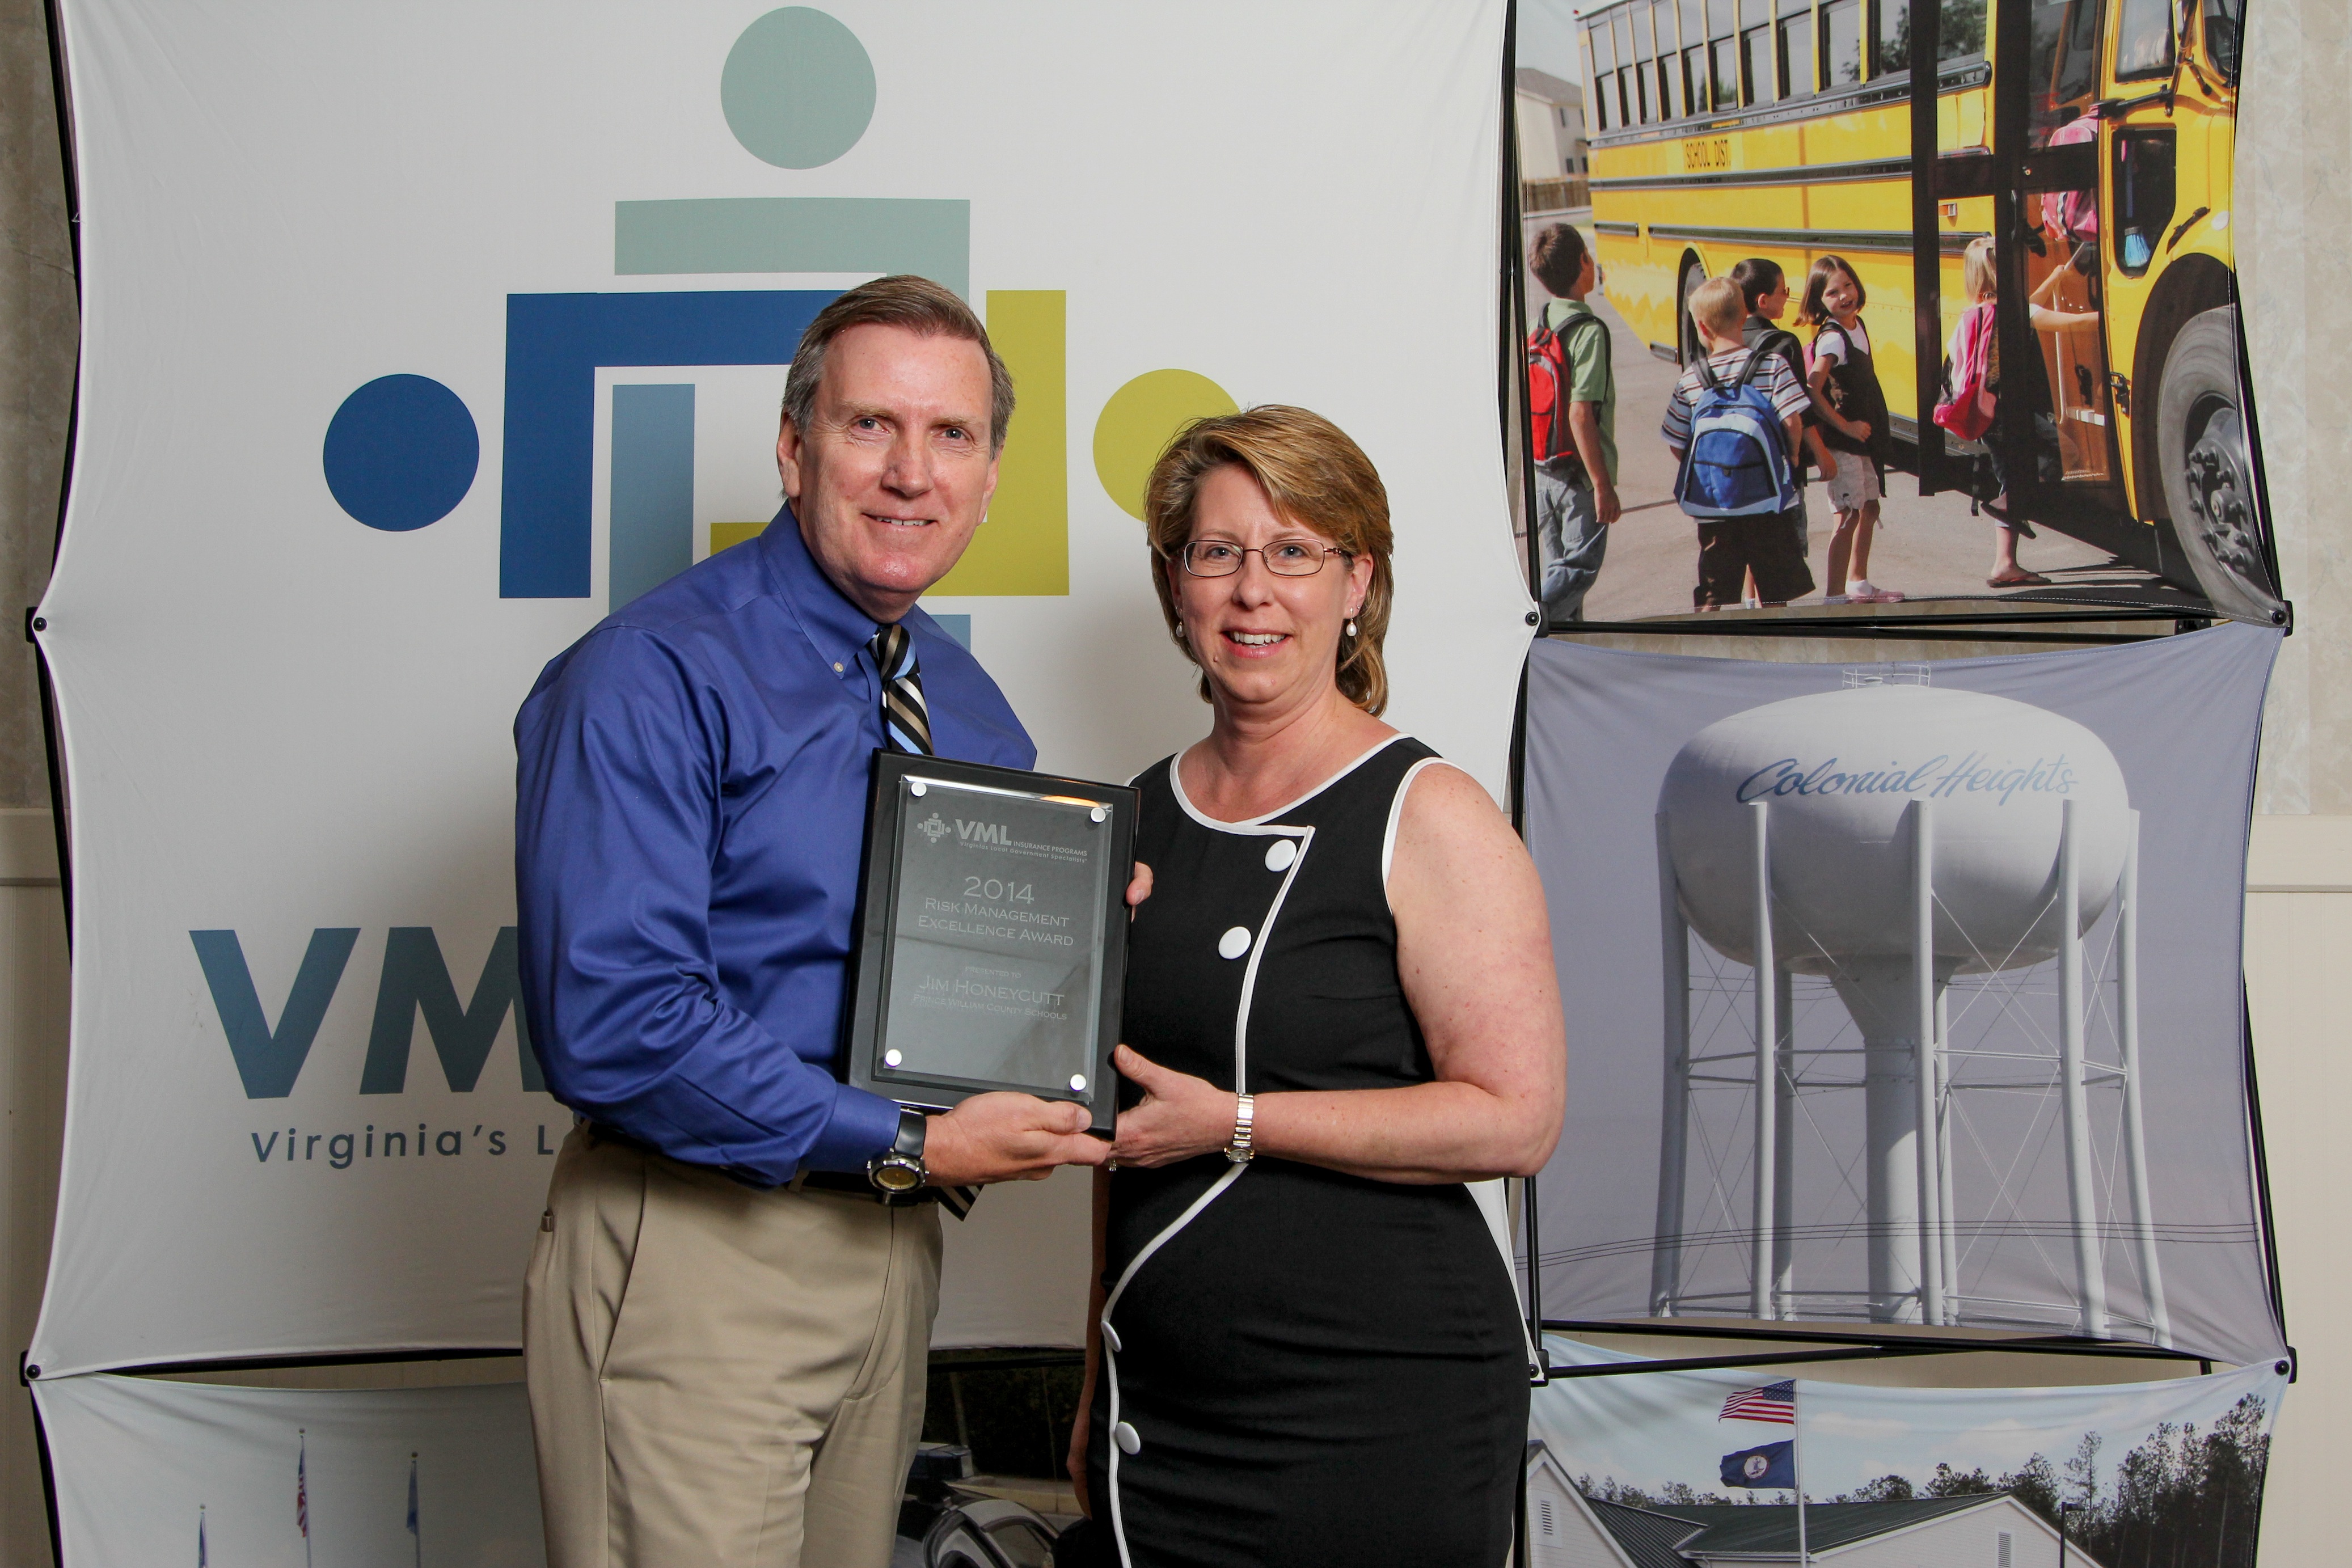 (L to R): Jim Honeycutt with Prince William County Schools and VMLIP Members’ Supervisory Board Chair Karen Pallansch